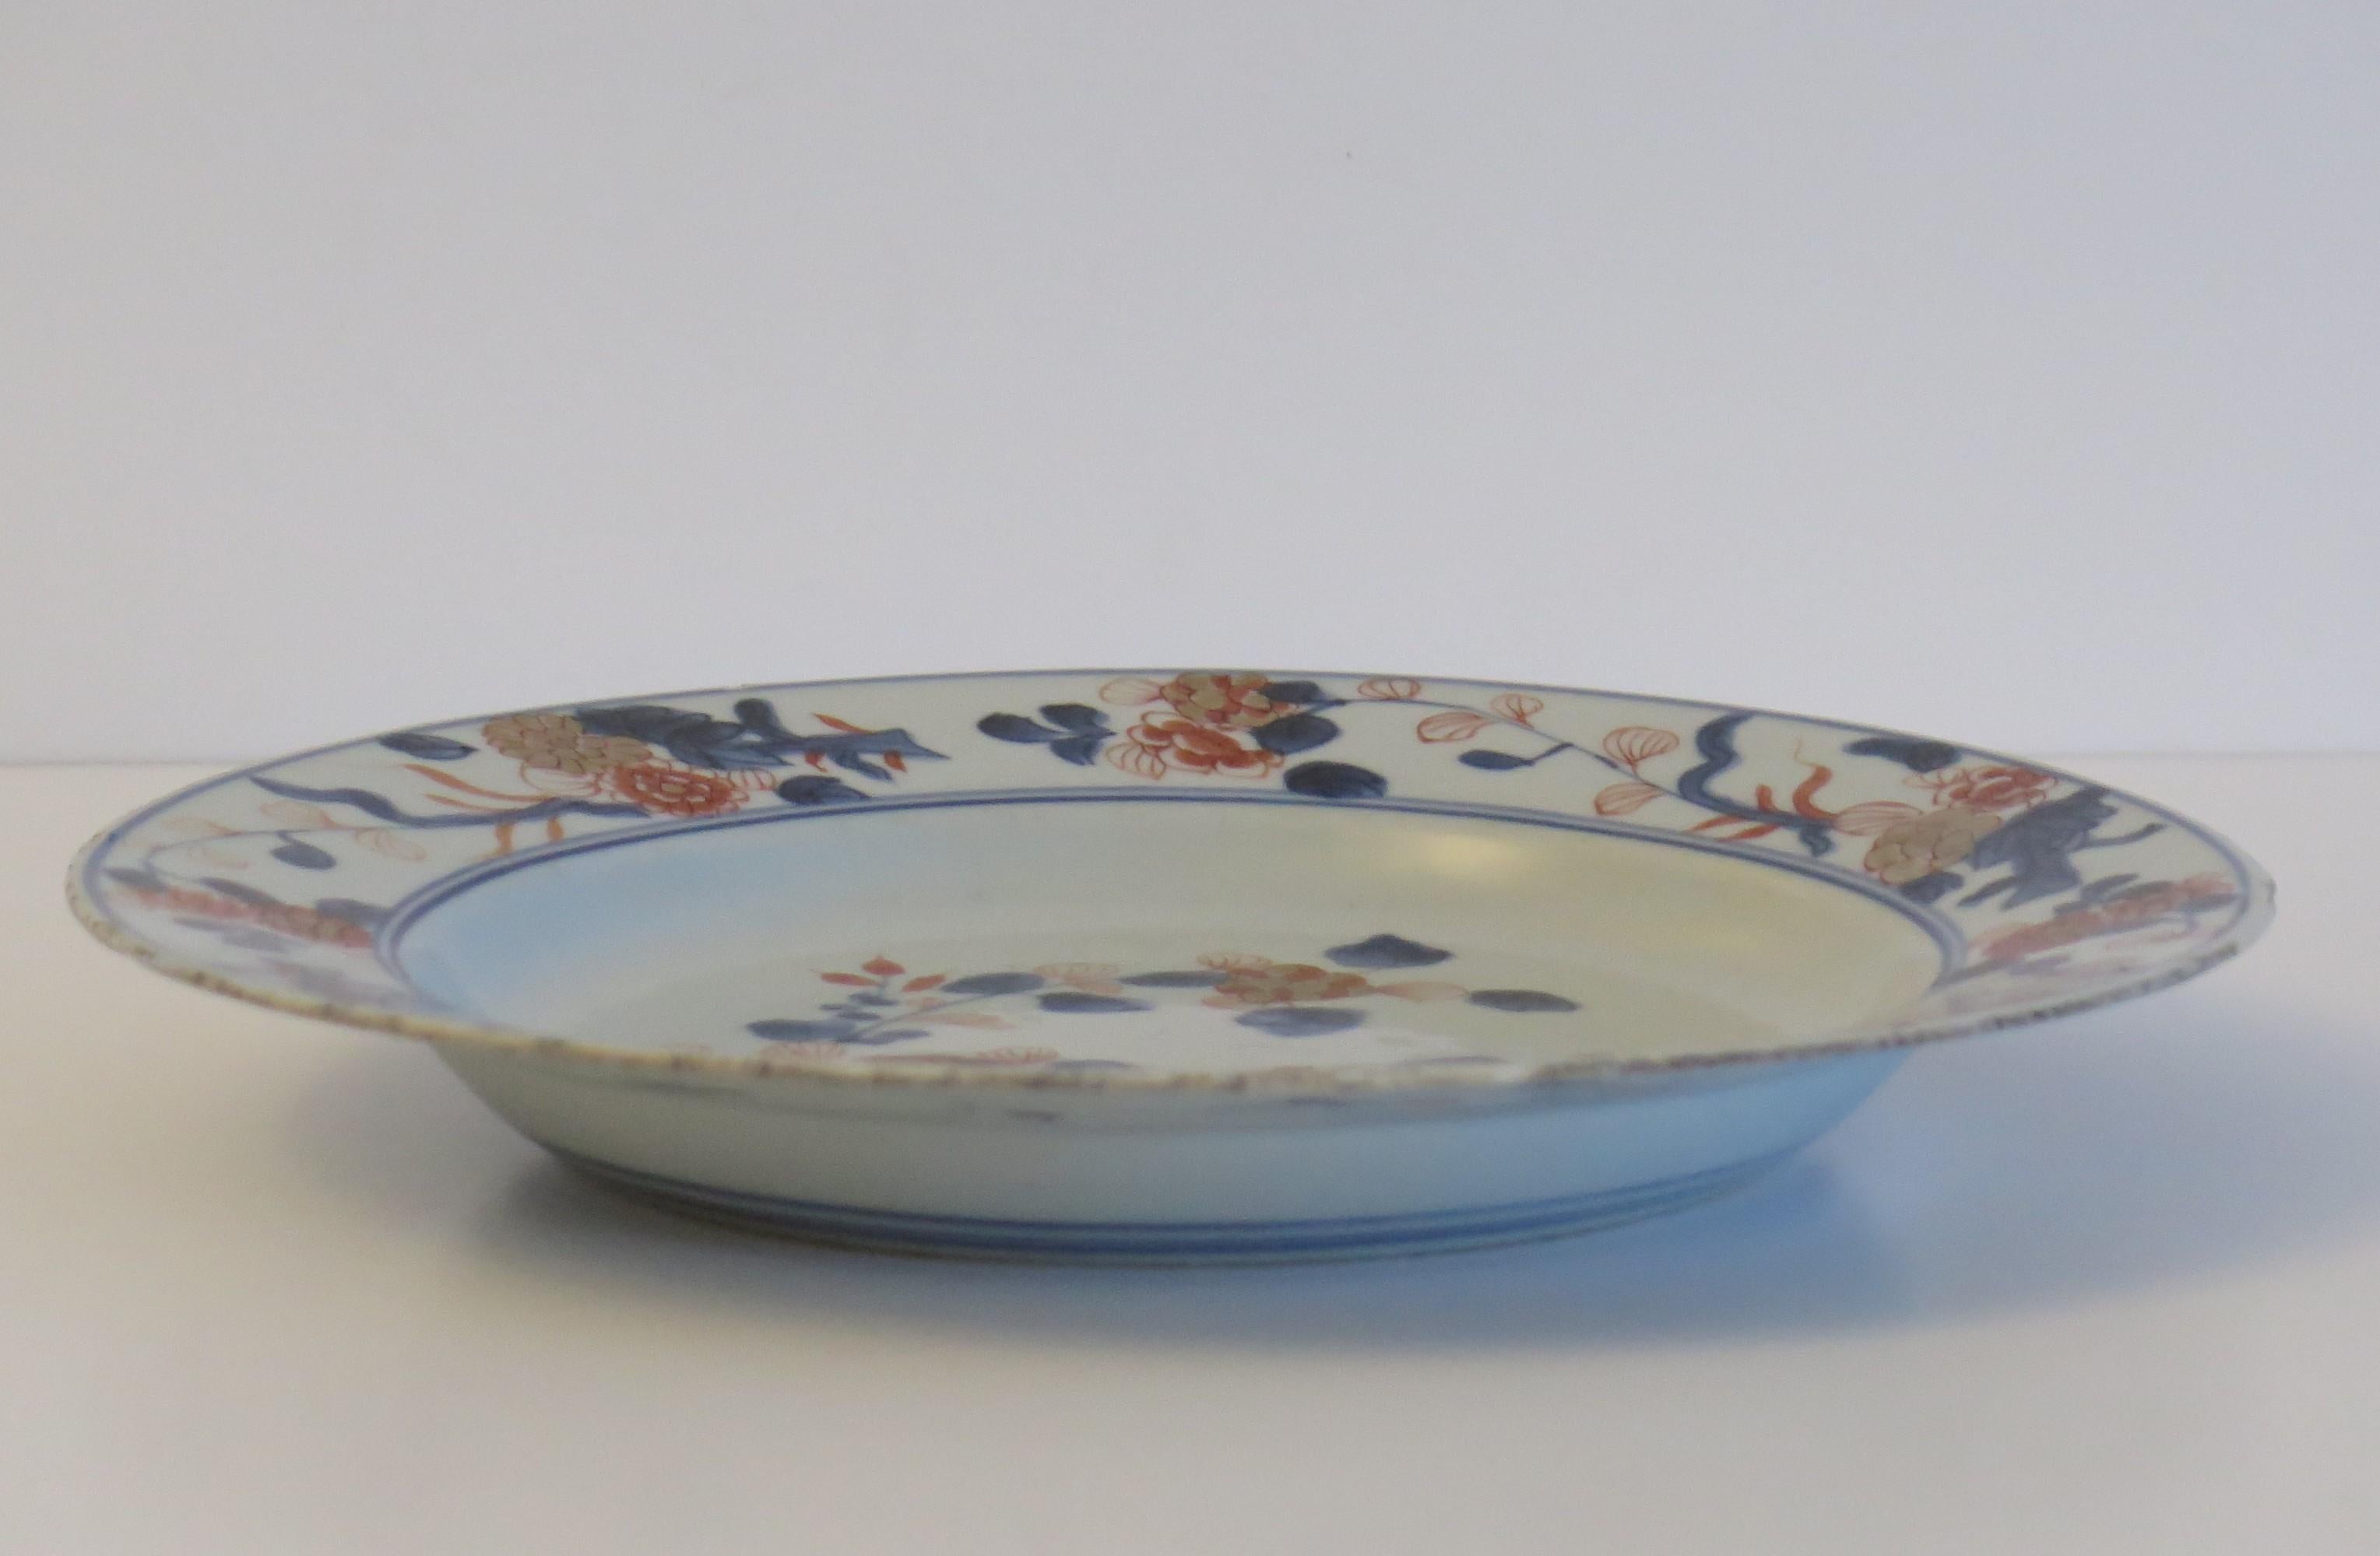 18th Century Chinese Porcelain Plate or Bowl Qing Kangxi Mark and Period, Ca 1700 For Sale